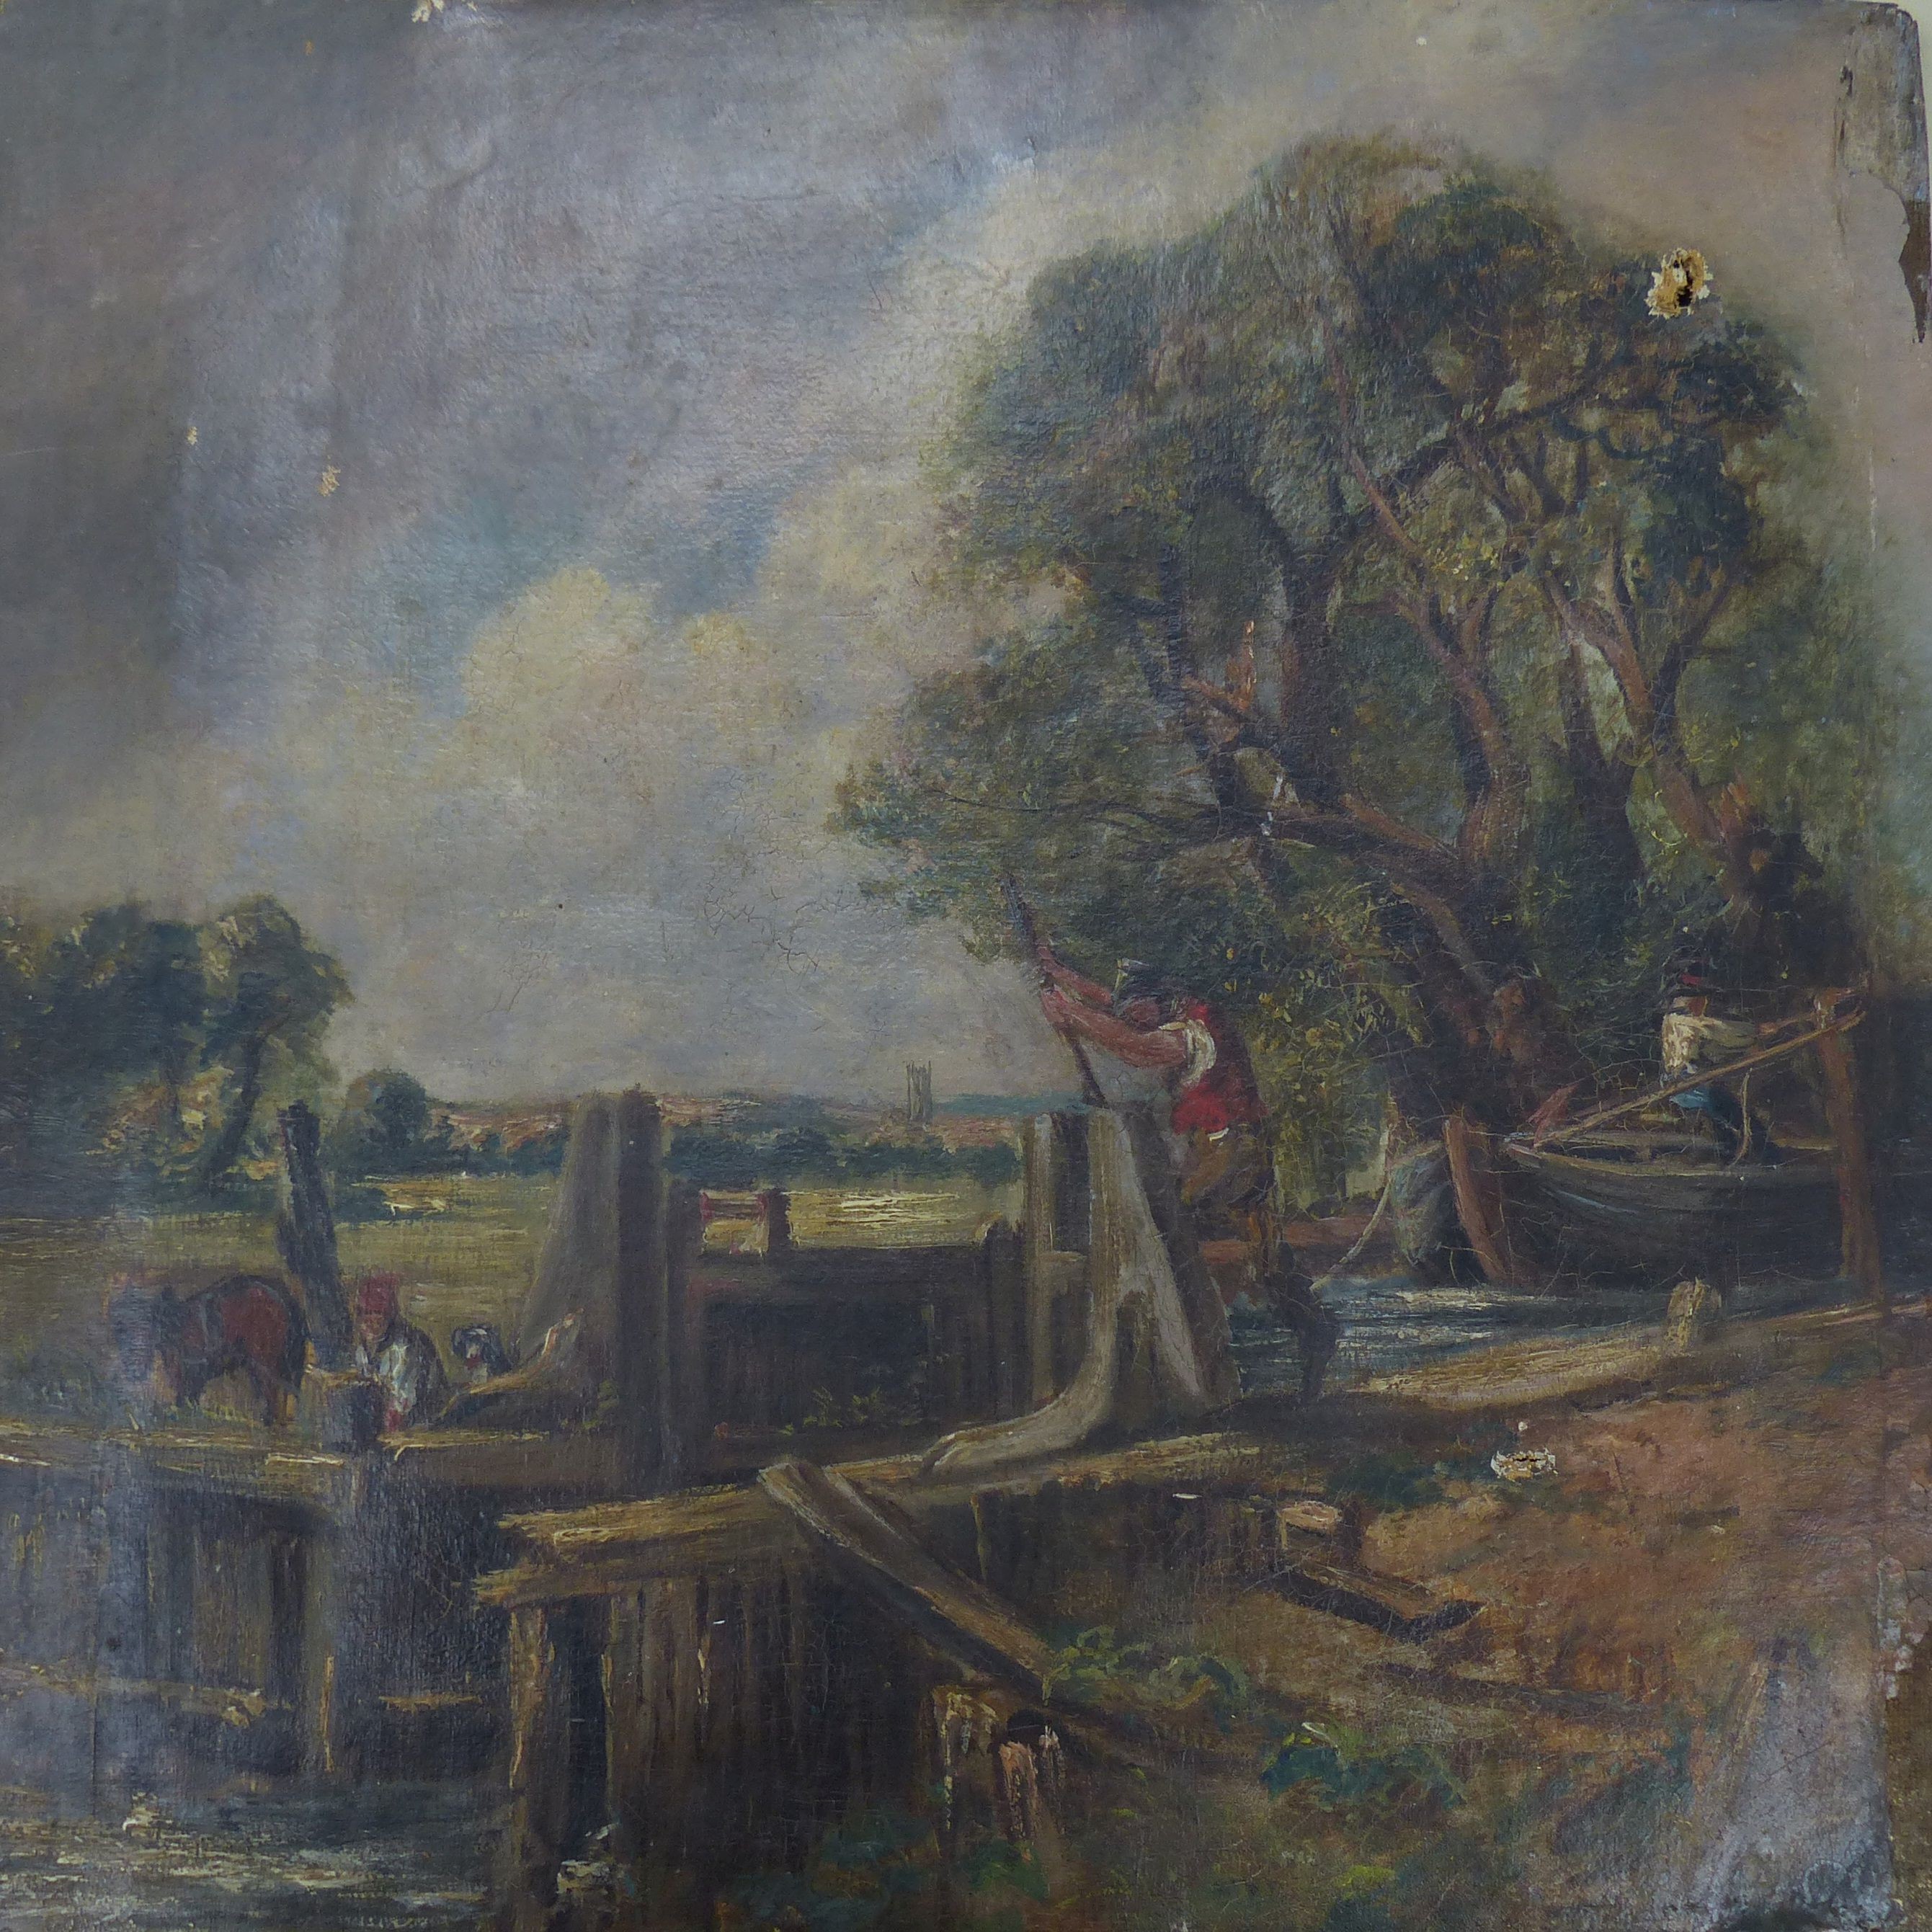 After Constable, oil on canvas, The Lock, 33 x 33cm, unframed